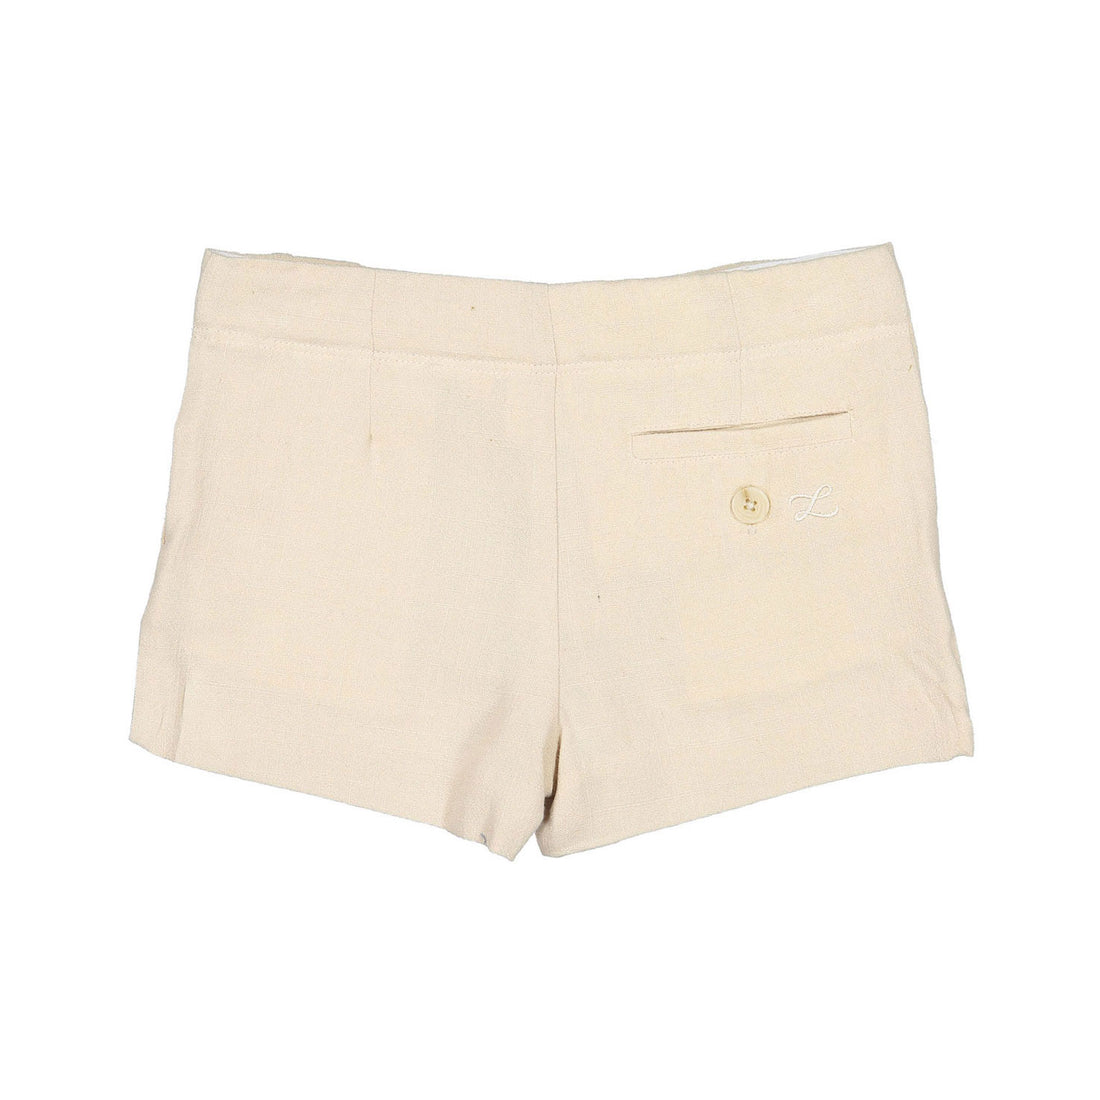 L by Ladida Taupe Linen StructuredShorts